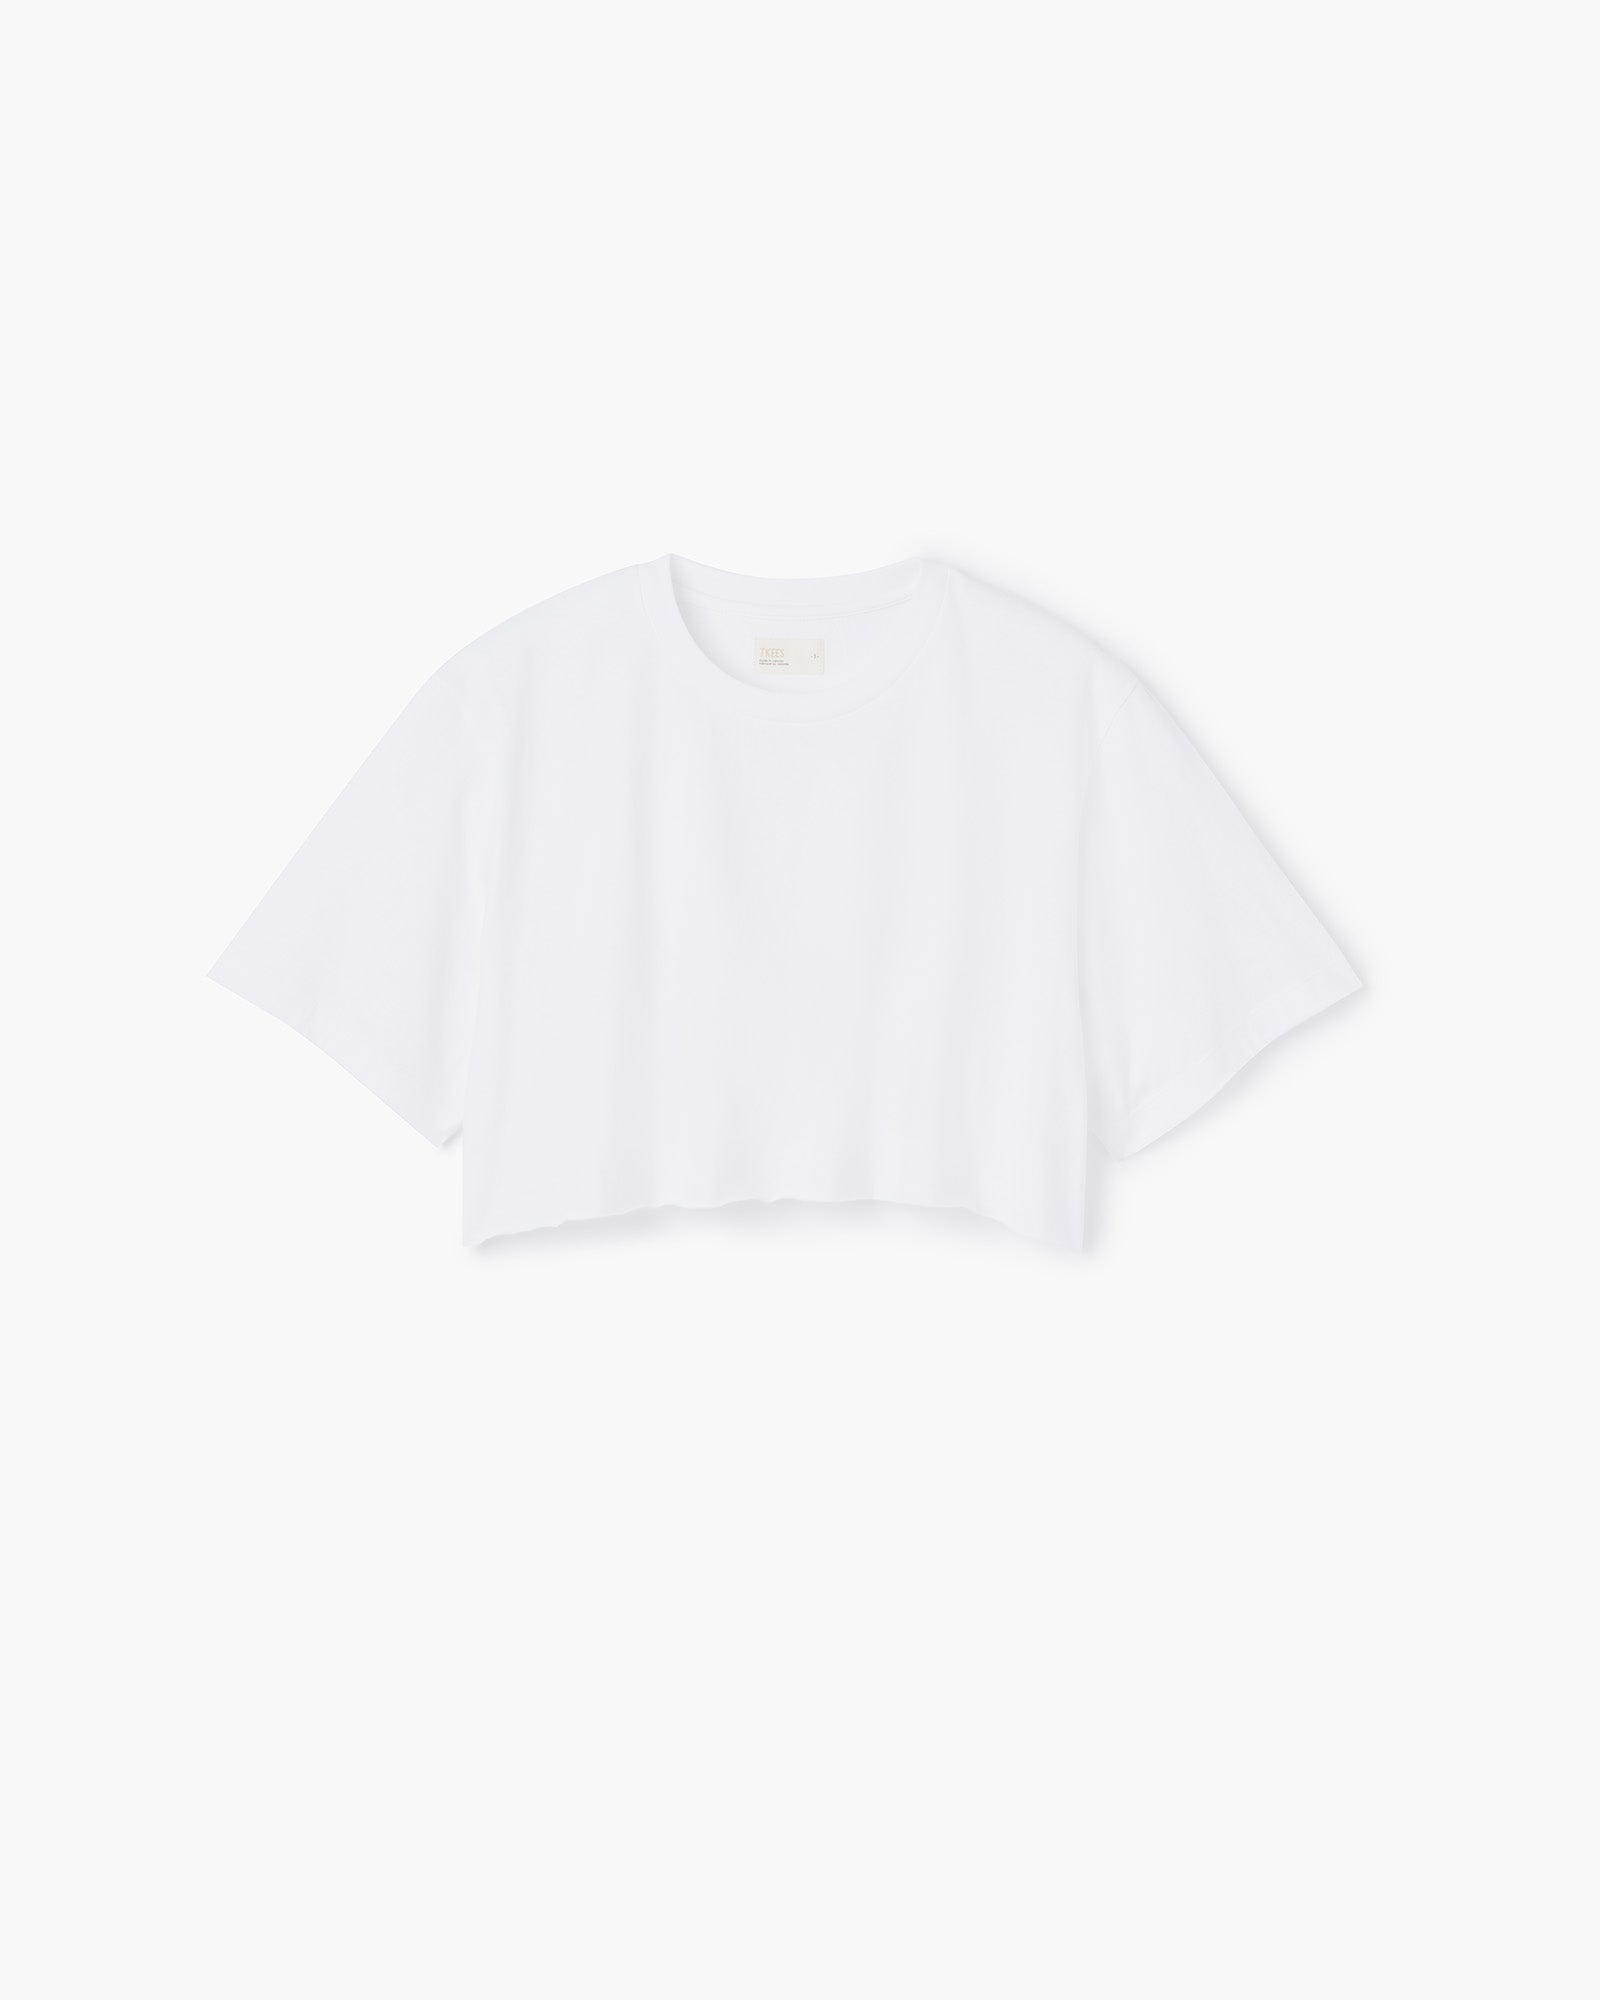 Cropped Tee in White | T-Shirts | Women\'s Clothing – TKEES